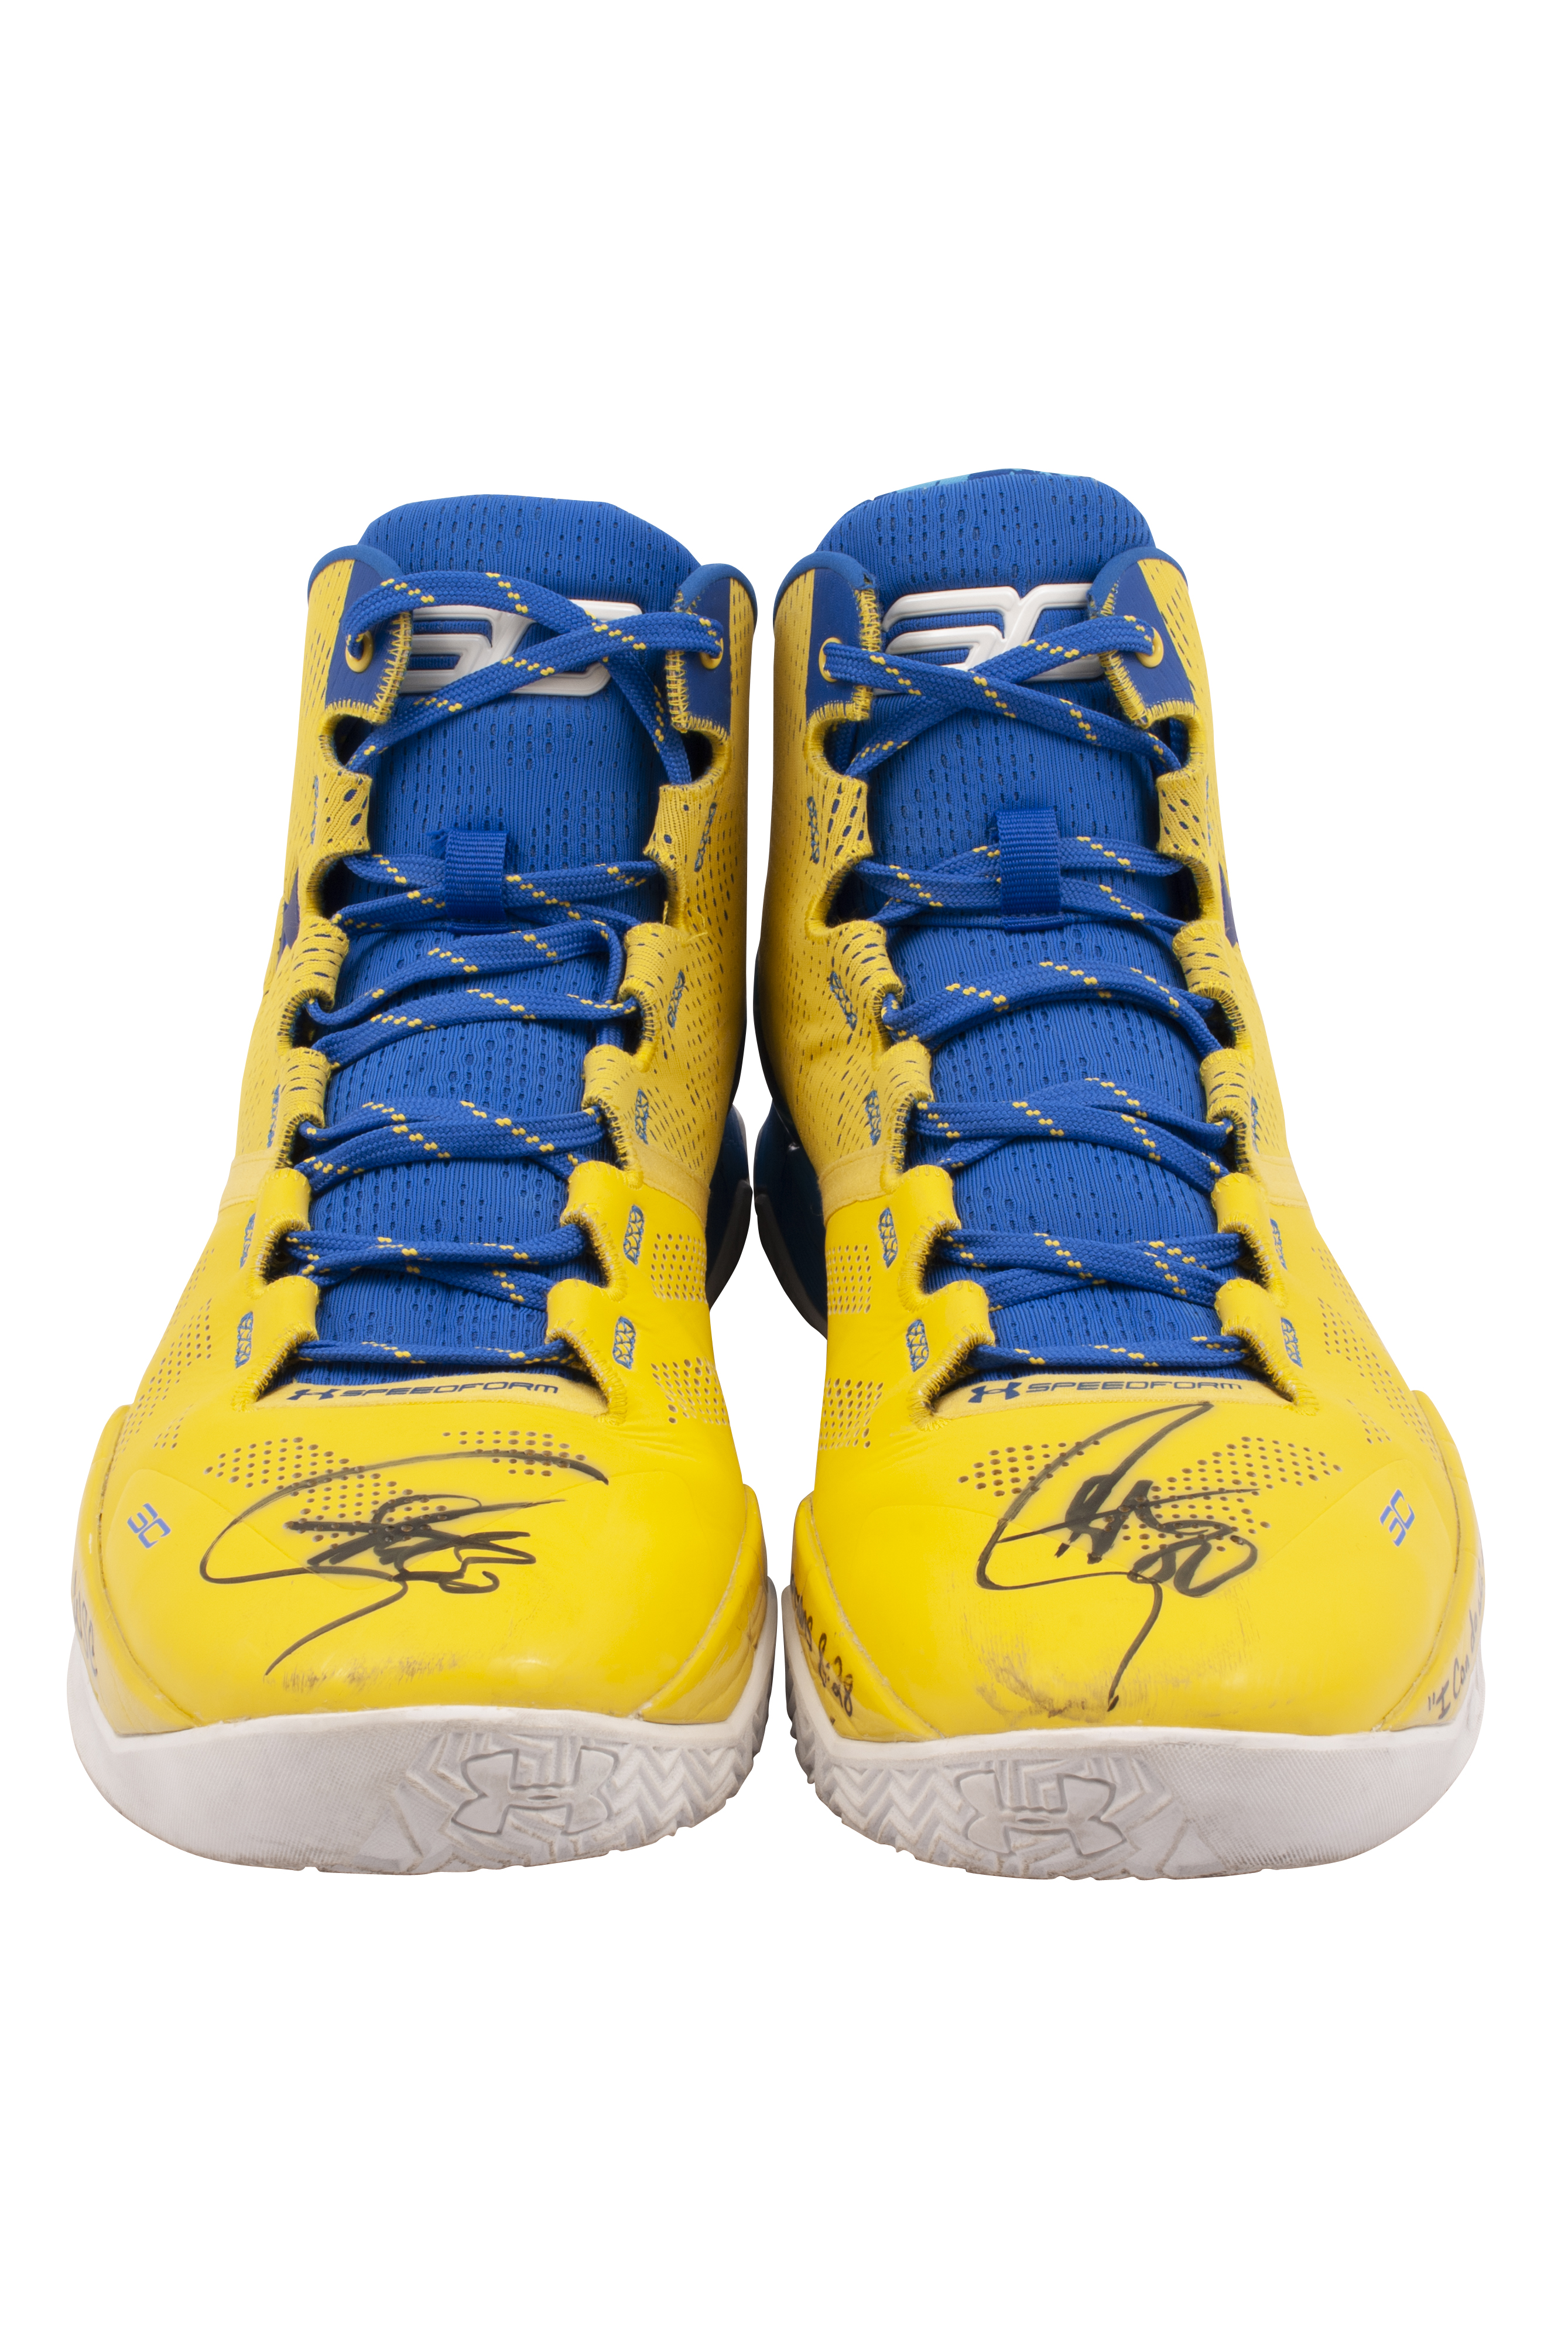 2013-14 Stephen Curry Game Worn, Signed Golden State Warriors Shoes, Lot  #13615